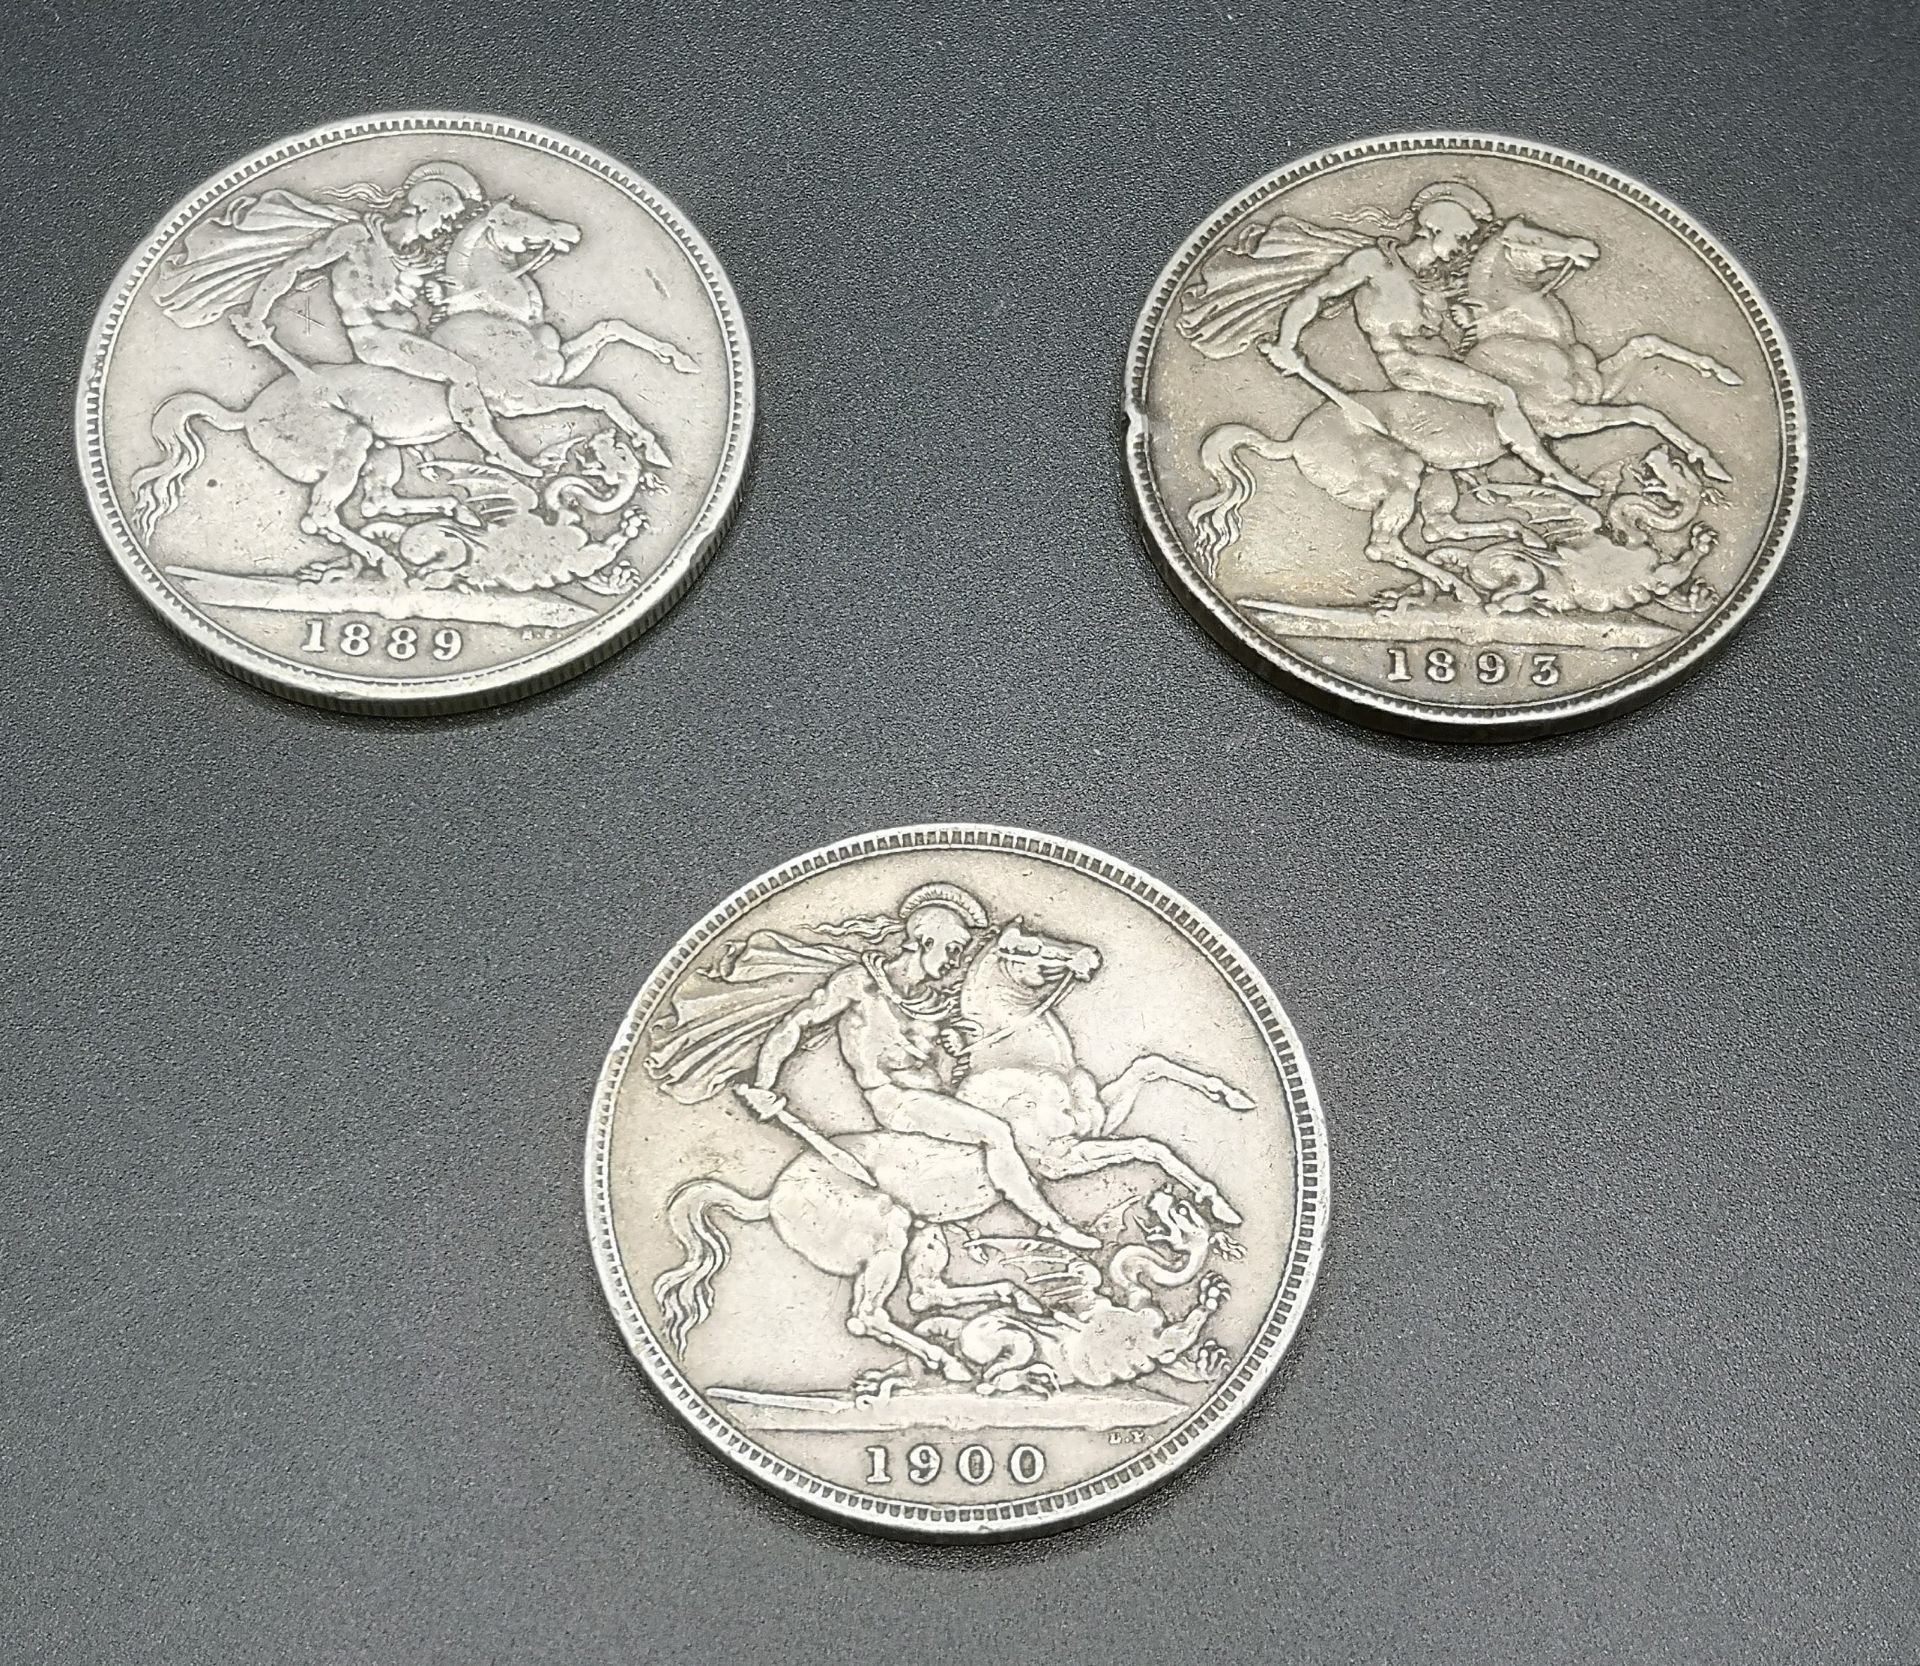 Three Queen Victoria crown coins: 1889, 1893, and 1900 - Image 3 of 10